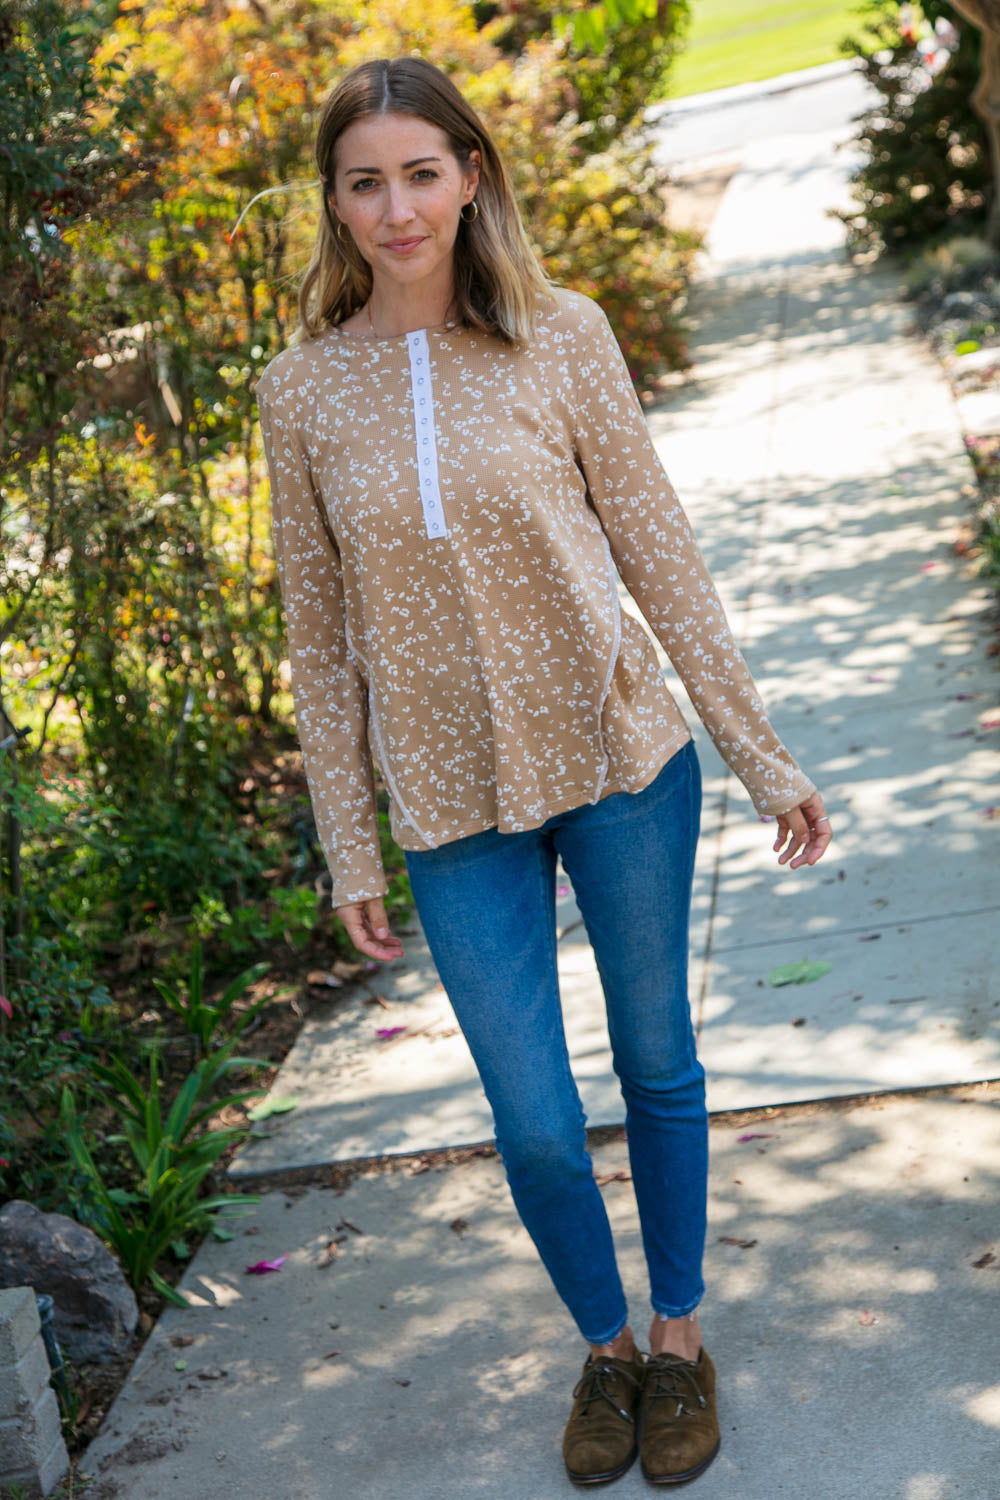 Thermal Leopard Print Snap Button Down Top